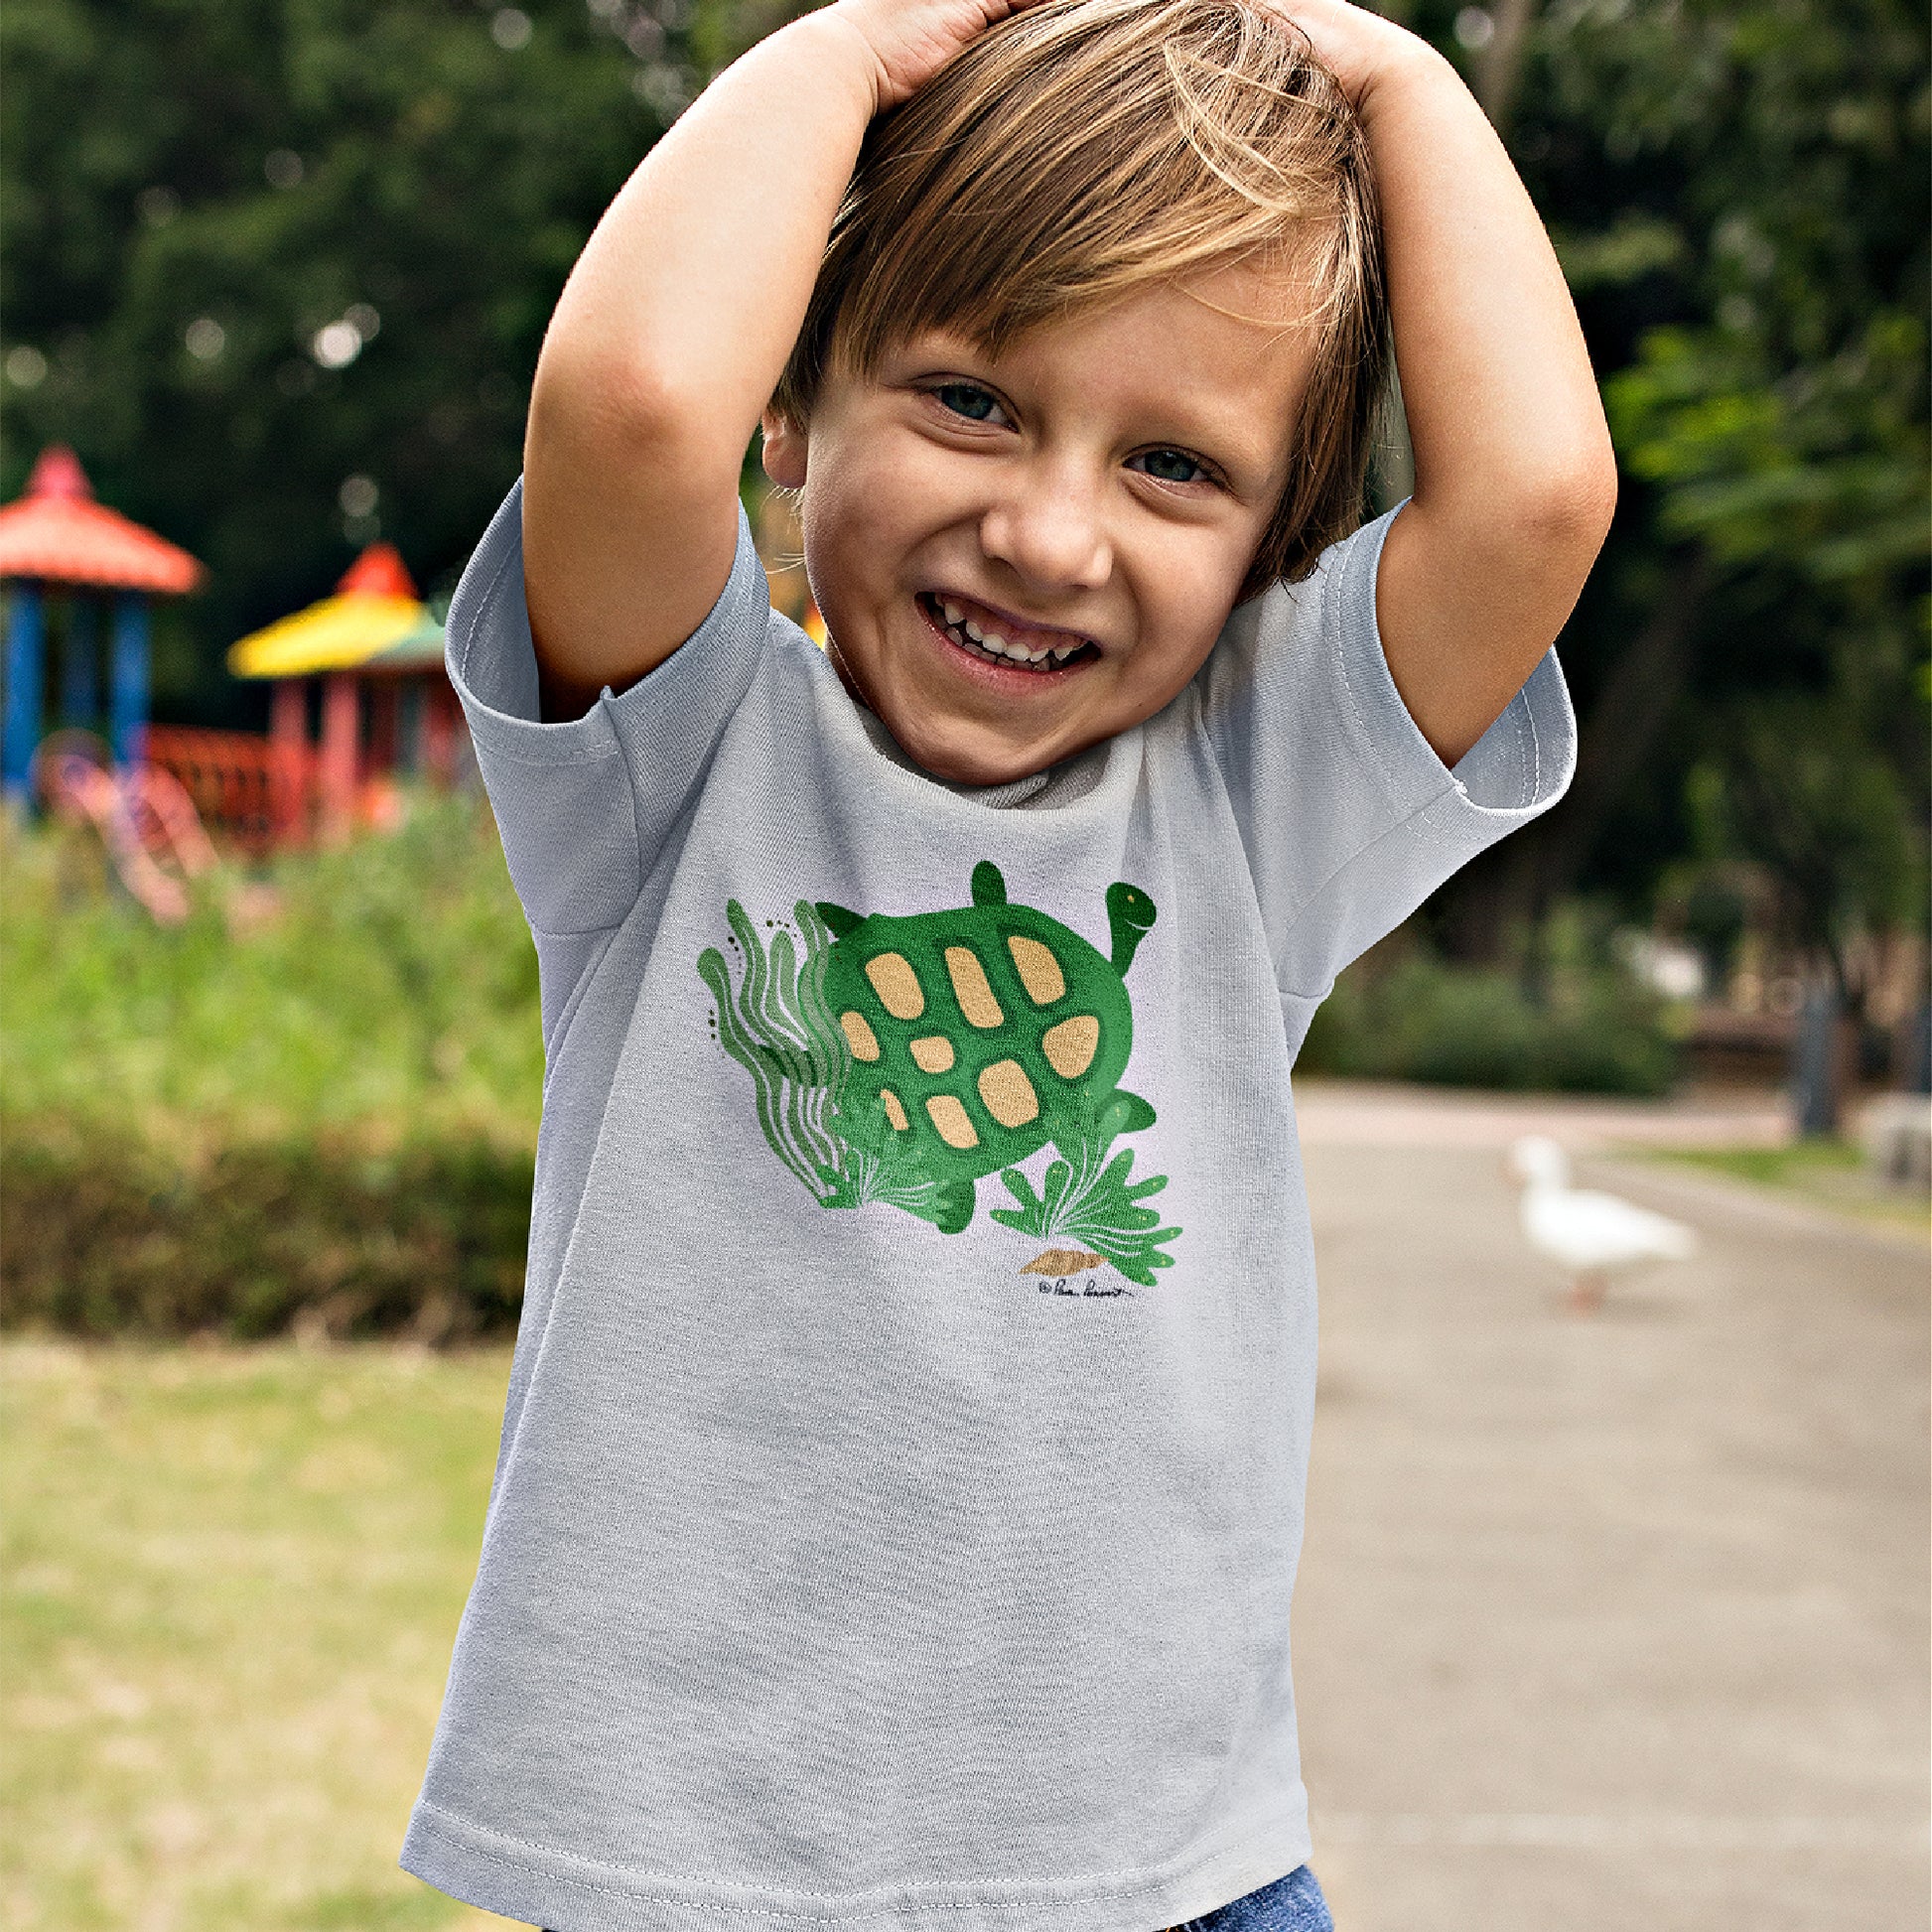 Mock up of a smiling boy wearing our Ash Gray t-shirt